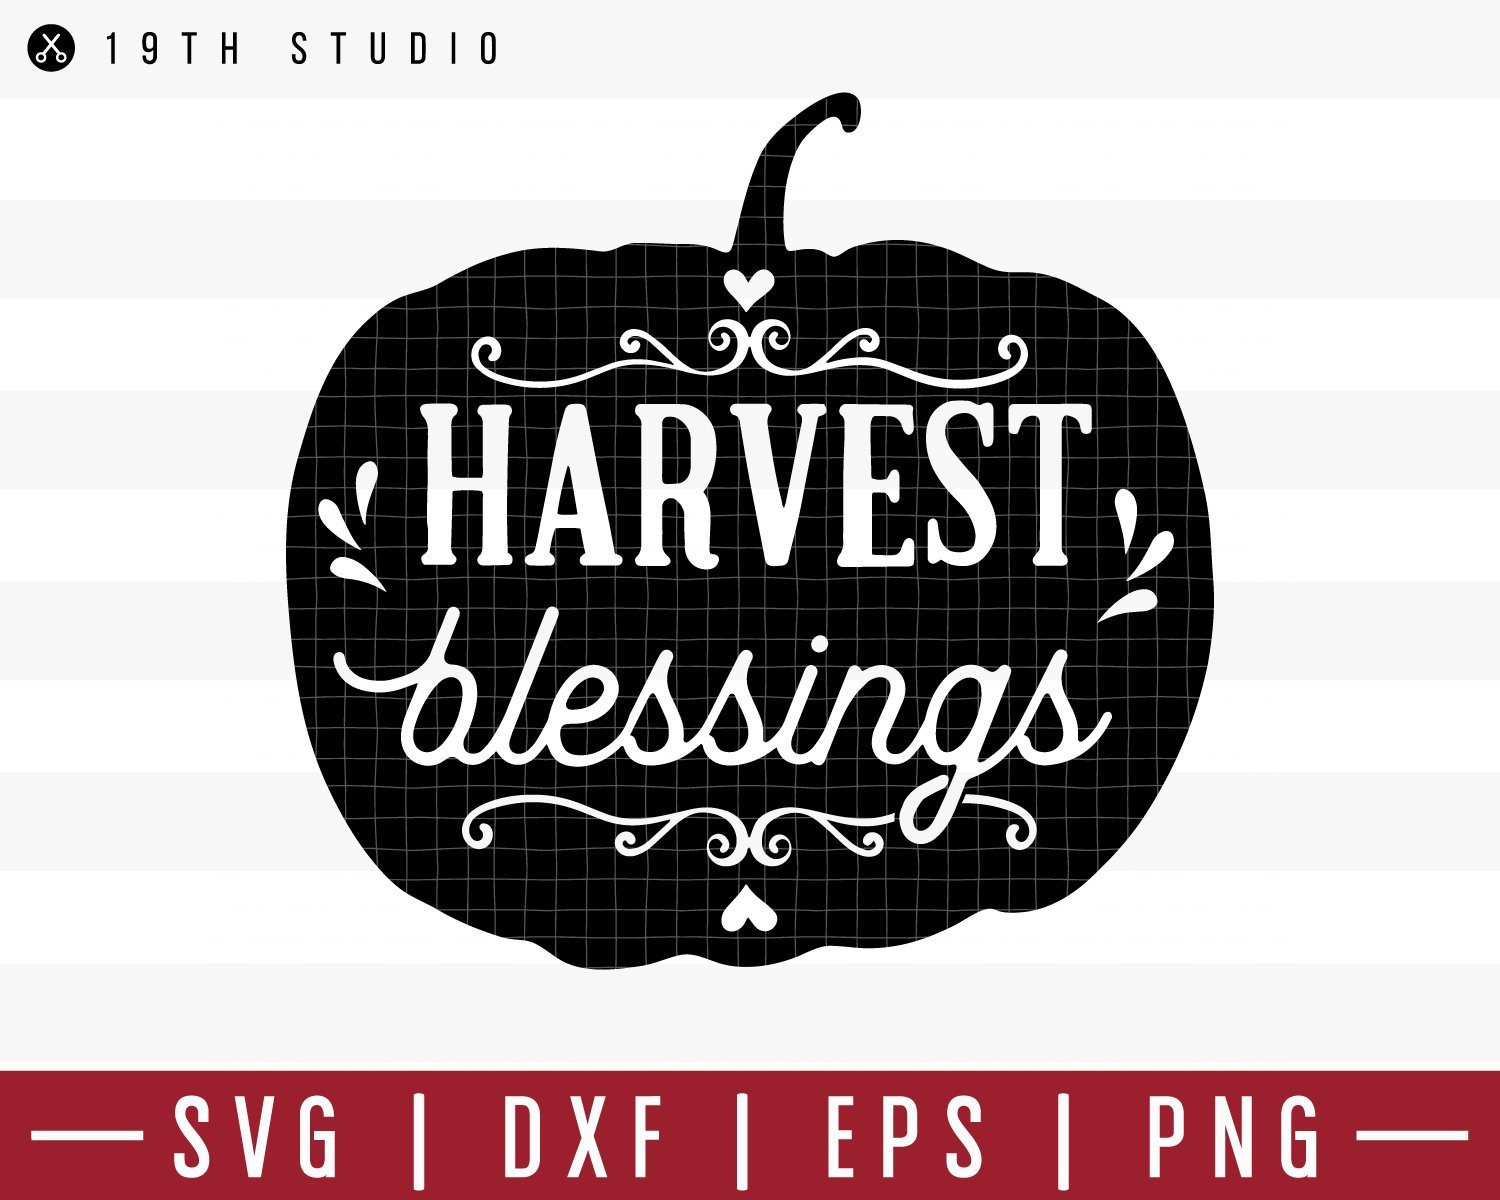 Harvest blessings SVG | M39F11 Craft House SVG - SVG files for Cricut and Silhouette